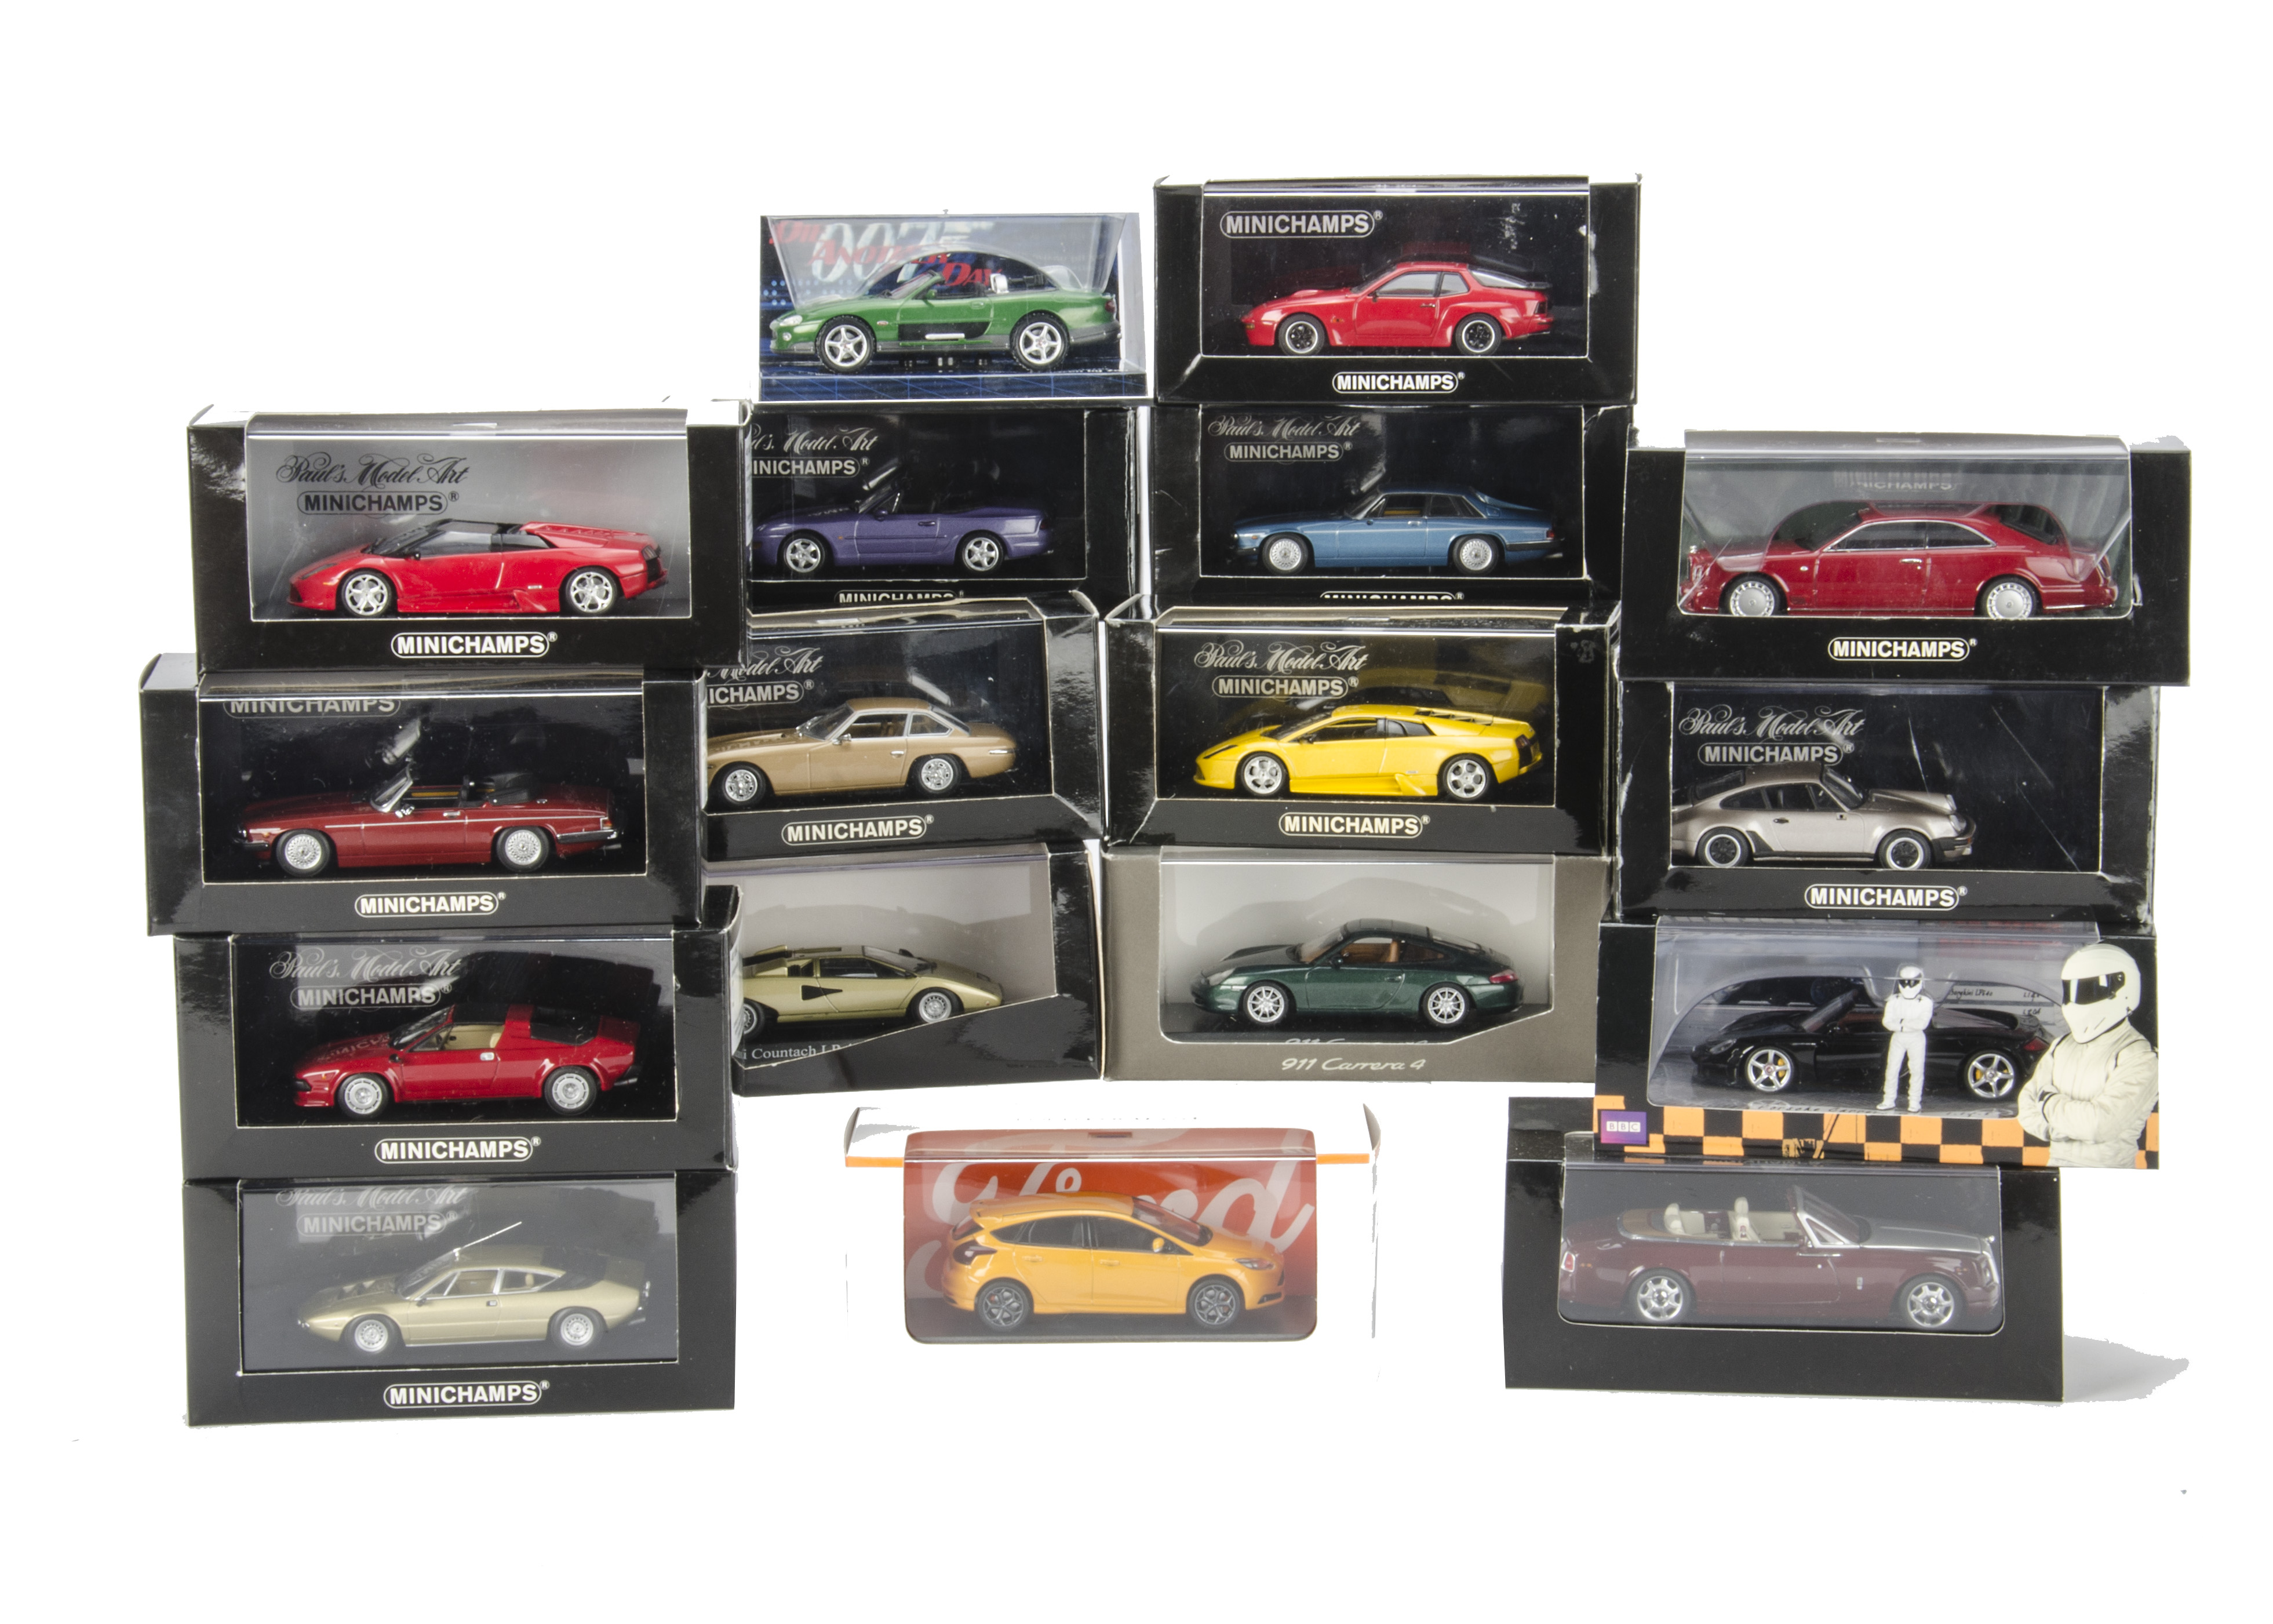 Minichamps, cars from the 'Top Gear', Porsche, Ford, Jaguar and other series, including a Jaguar